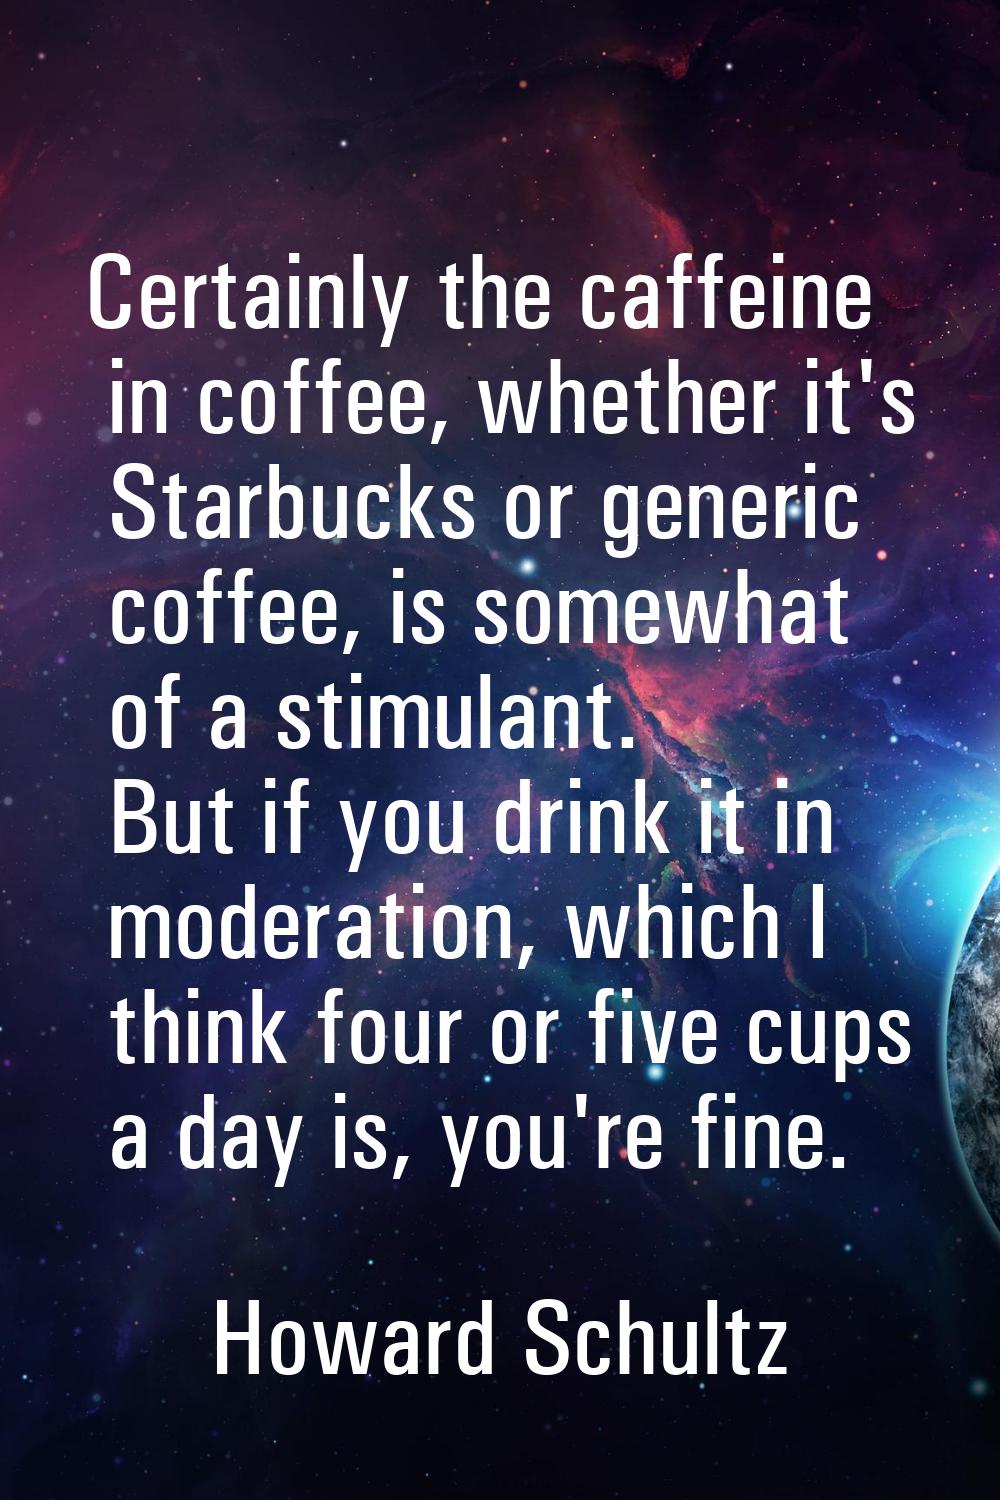 Certainly the caffeine in coffee, whether it's Starbucks or generic coffee, is somewhat of a stimul